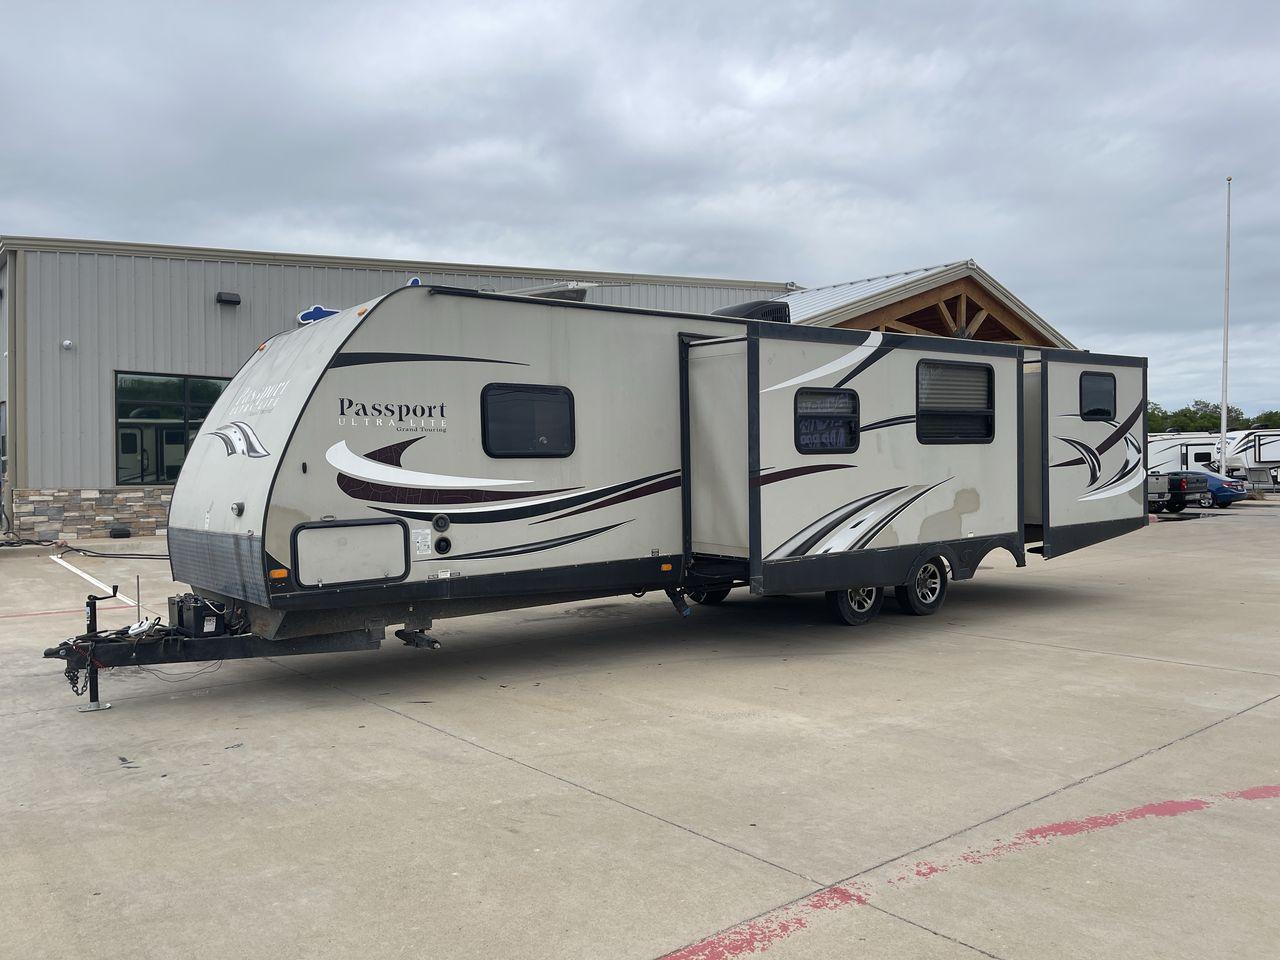 2015 WHITE KEYSTONE PASSPORT 3320 BH - (4YDT33229FT) , Length: 36.83 ft. | Dry Weight: 6,590 lbs. | Gross Weight: 8,000 lbs. | Slides: 3 transmission, located at 4319 N Main Street, Cleburne, TX, 76033, (817) 221-0660, 32.435829, -97.384178 - With the 2015 Keystone Passport 3320BH travel trailer, you can easily bring friends along for a fun camping adventure. This unit measures 36.83 ft. in length and 10.92 ft. in height. It has a dry weight of 6,590 lbs. with a payload capacity of 1,410 lbs. The GVWR is about 8,000 lbs, and the hitch we - Photo #23